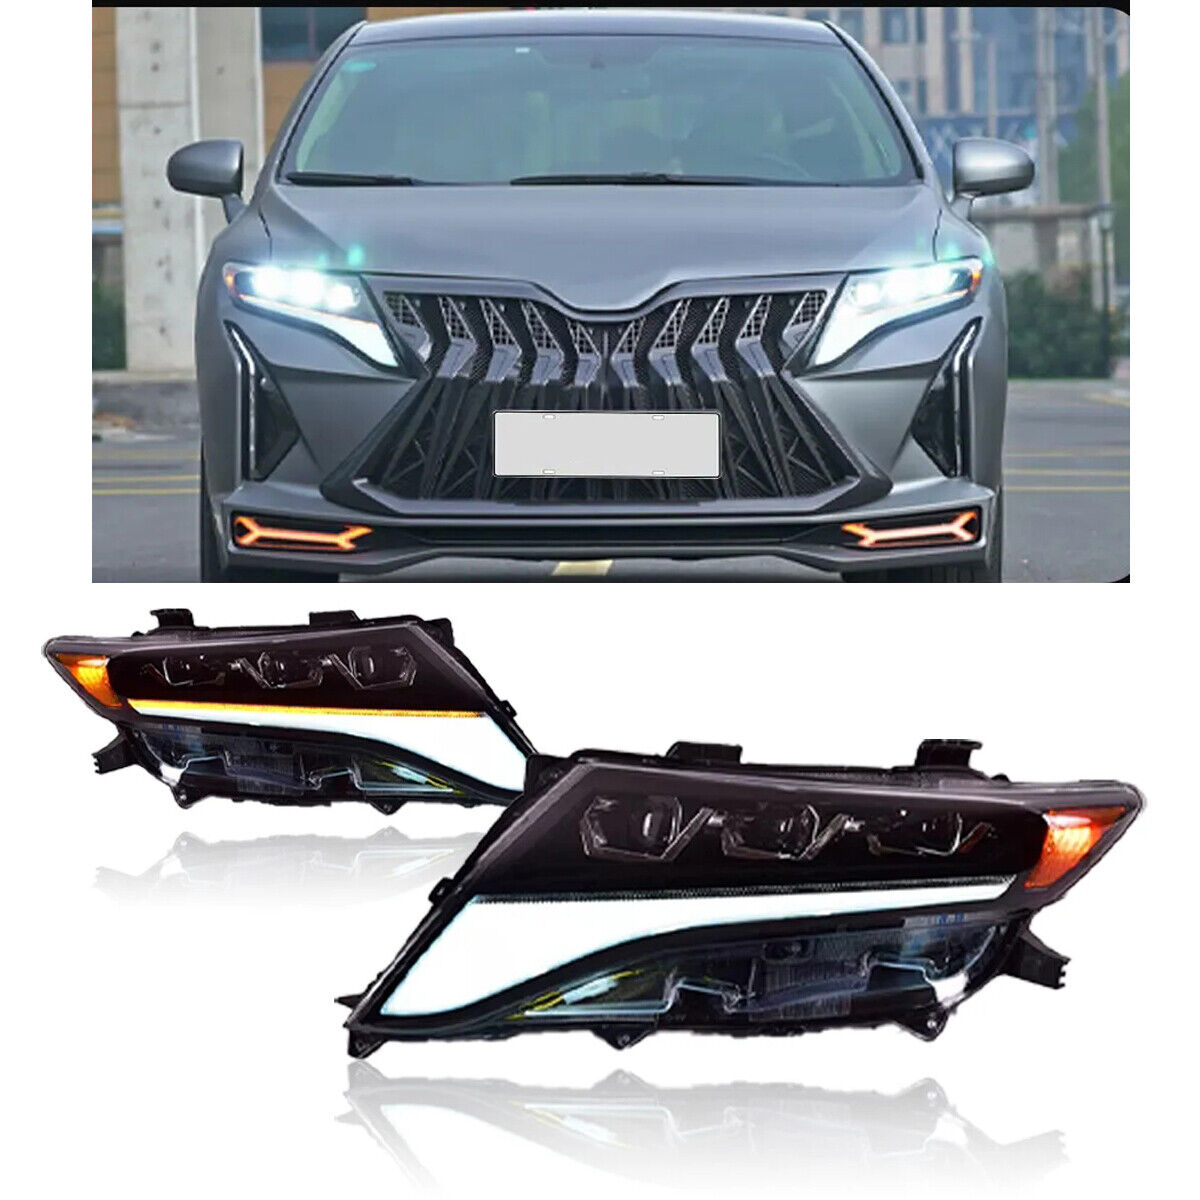 Car Headlights For Toyota Venza 2009-2015 LED Car Lamps DRL Dynamic Turn Signals